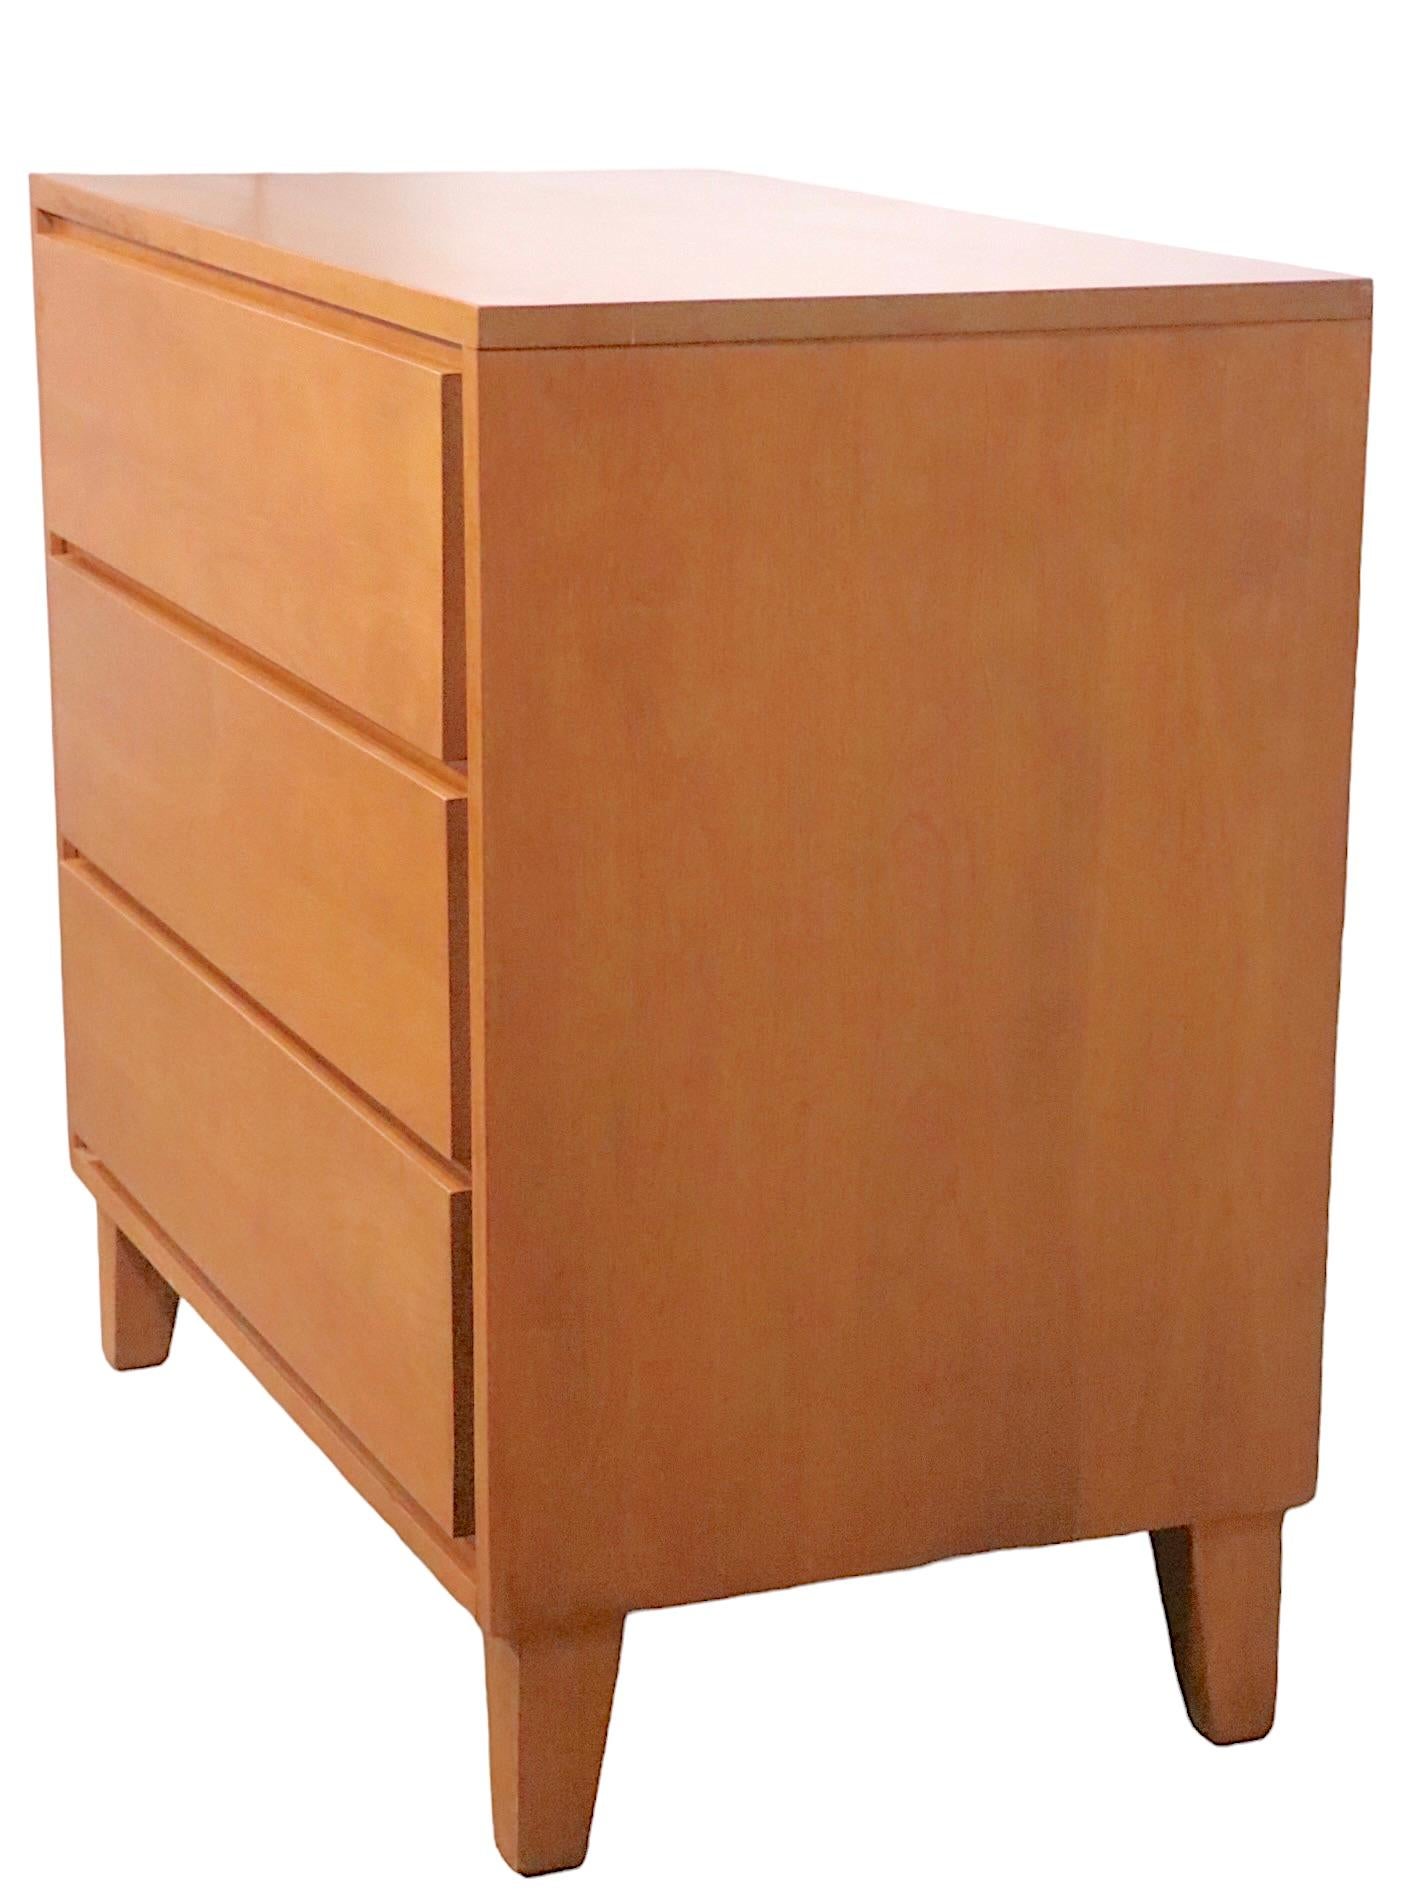 Wood Mid Century Bachelors Chest by Leslie Diamond Conant Ball  Modern Mates c 1950's For Sale